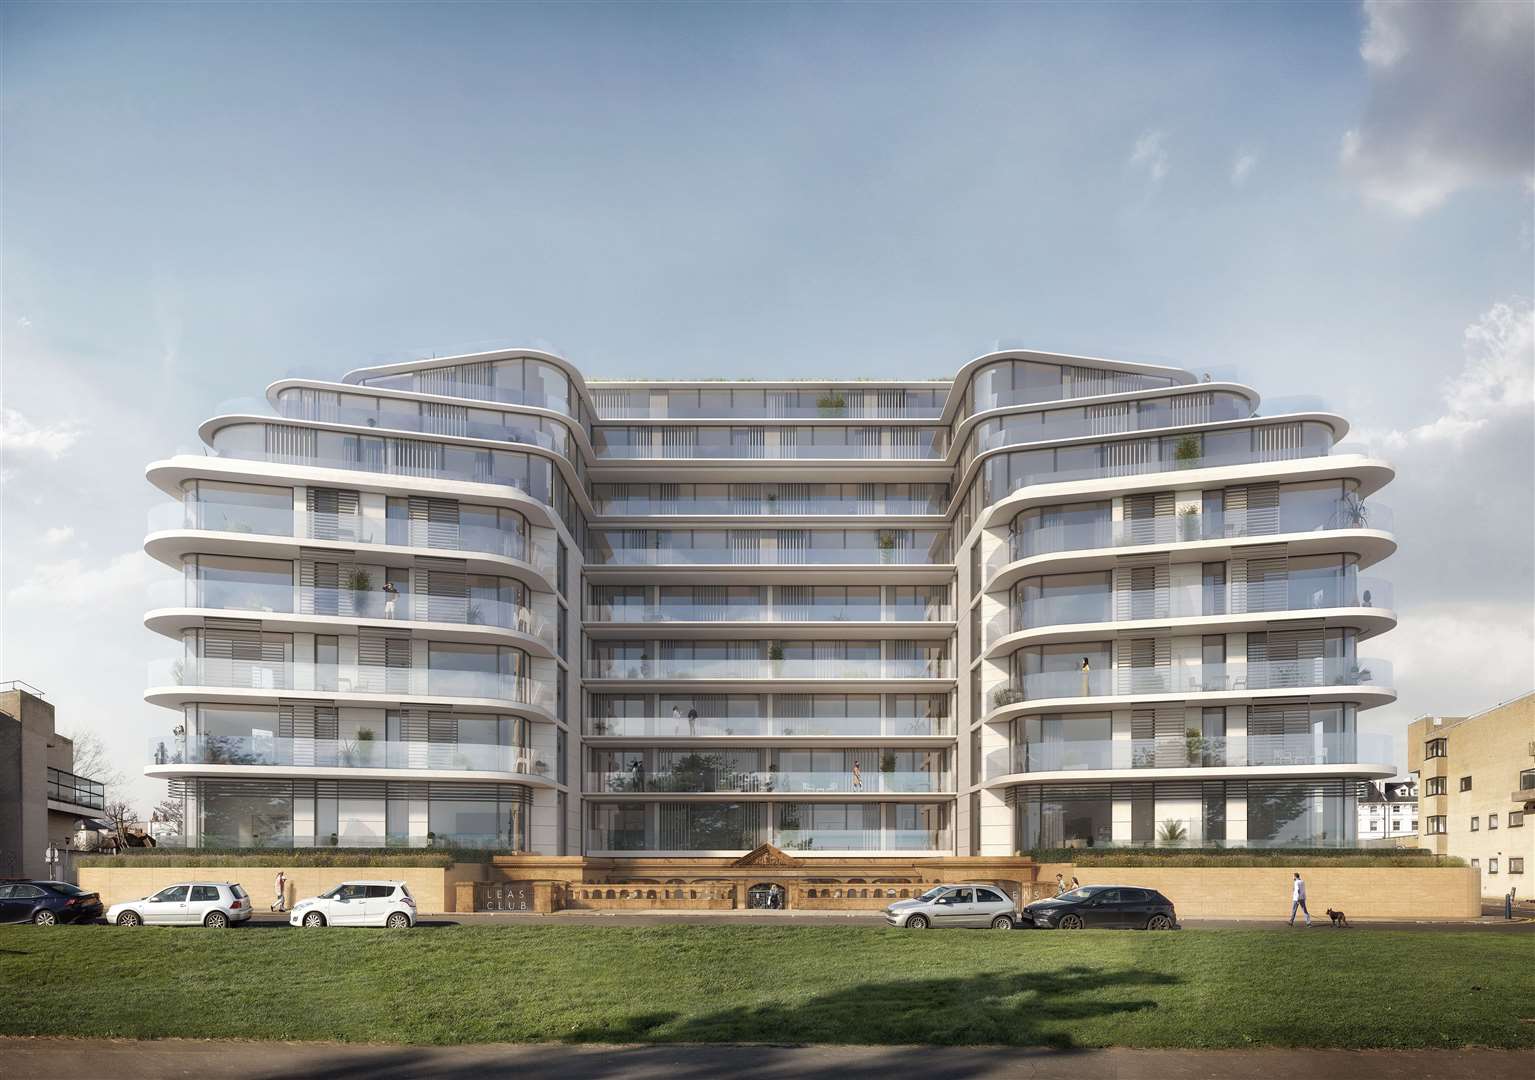 The development will be nine storeys high when complete. Picture: Hollaway